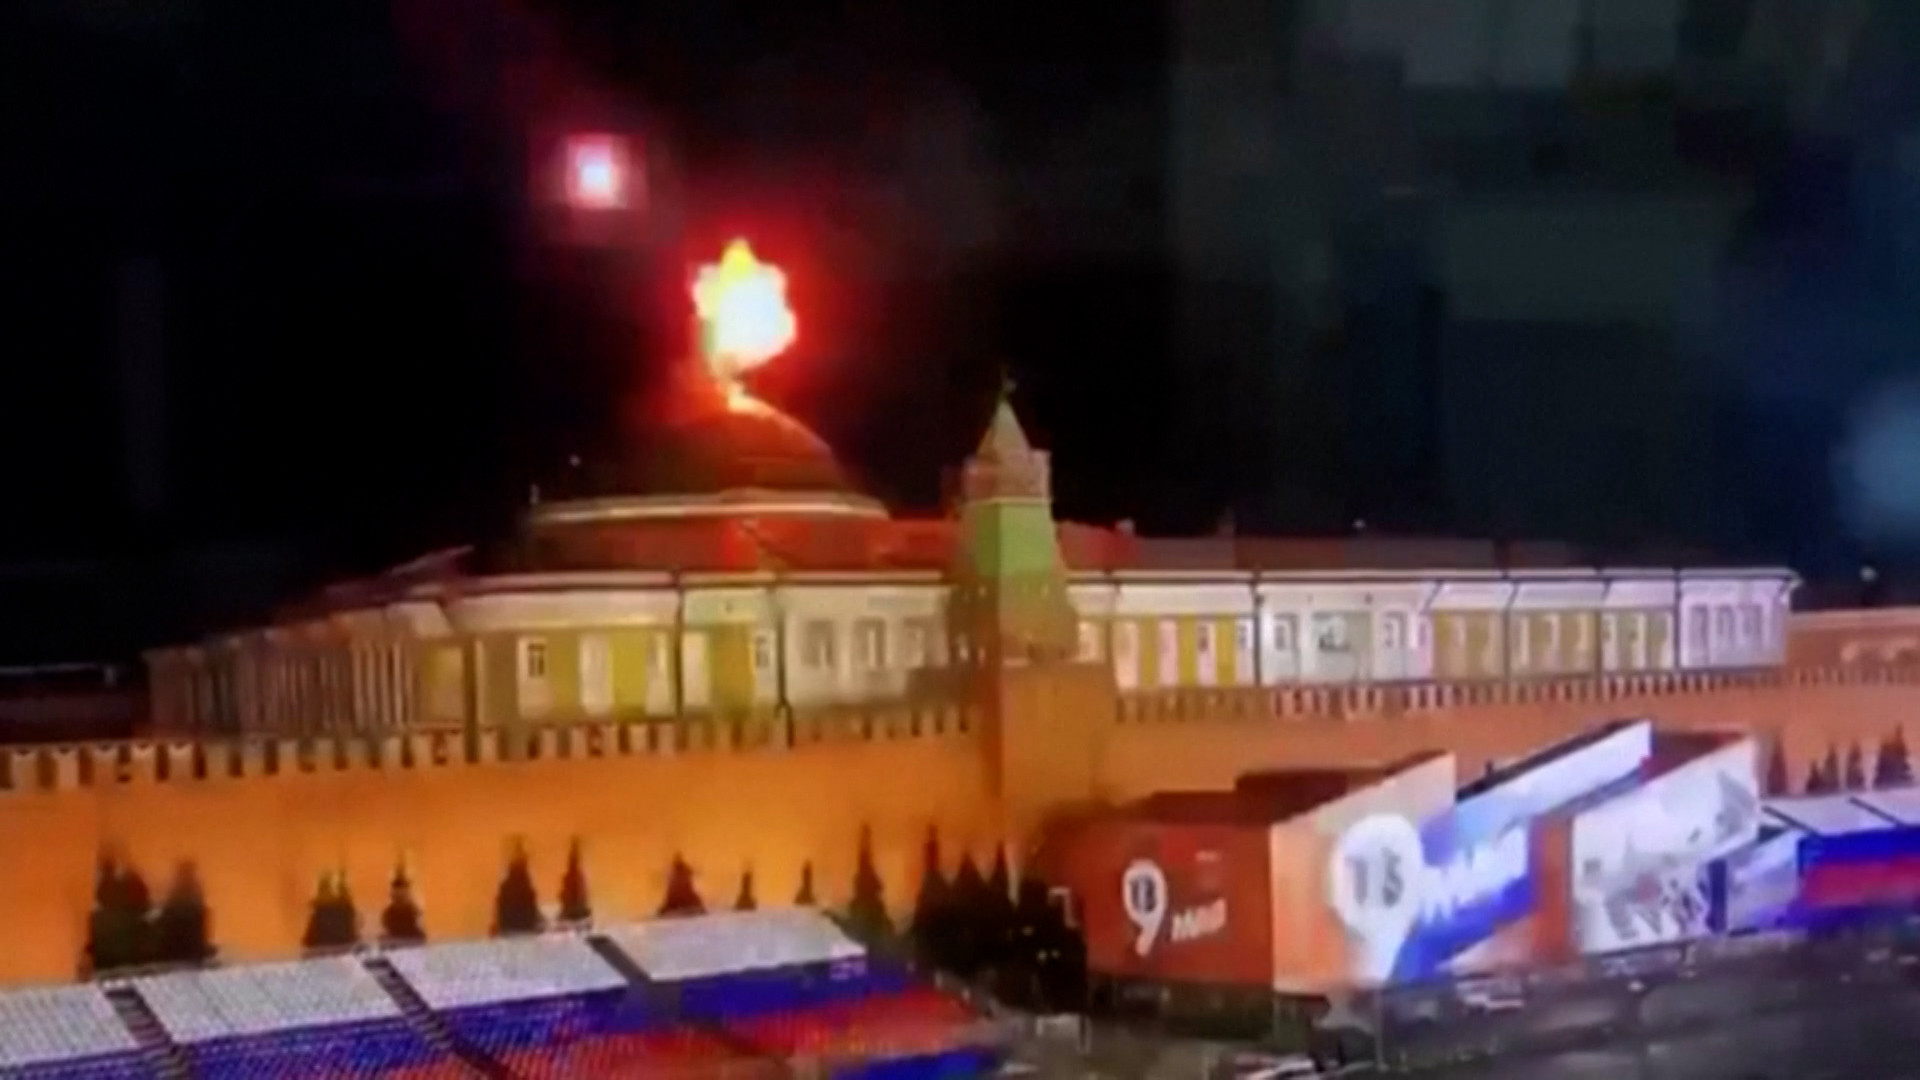 Video shows drone explosion above the Kremlin